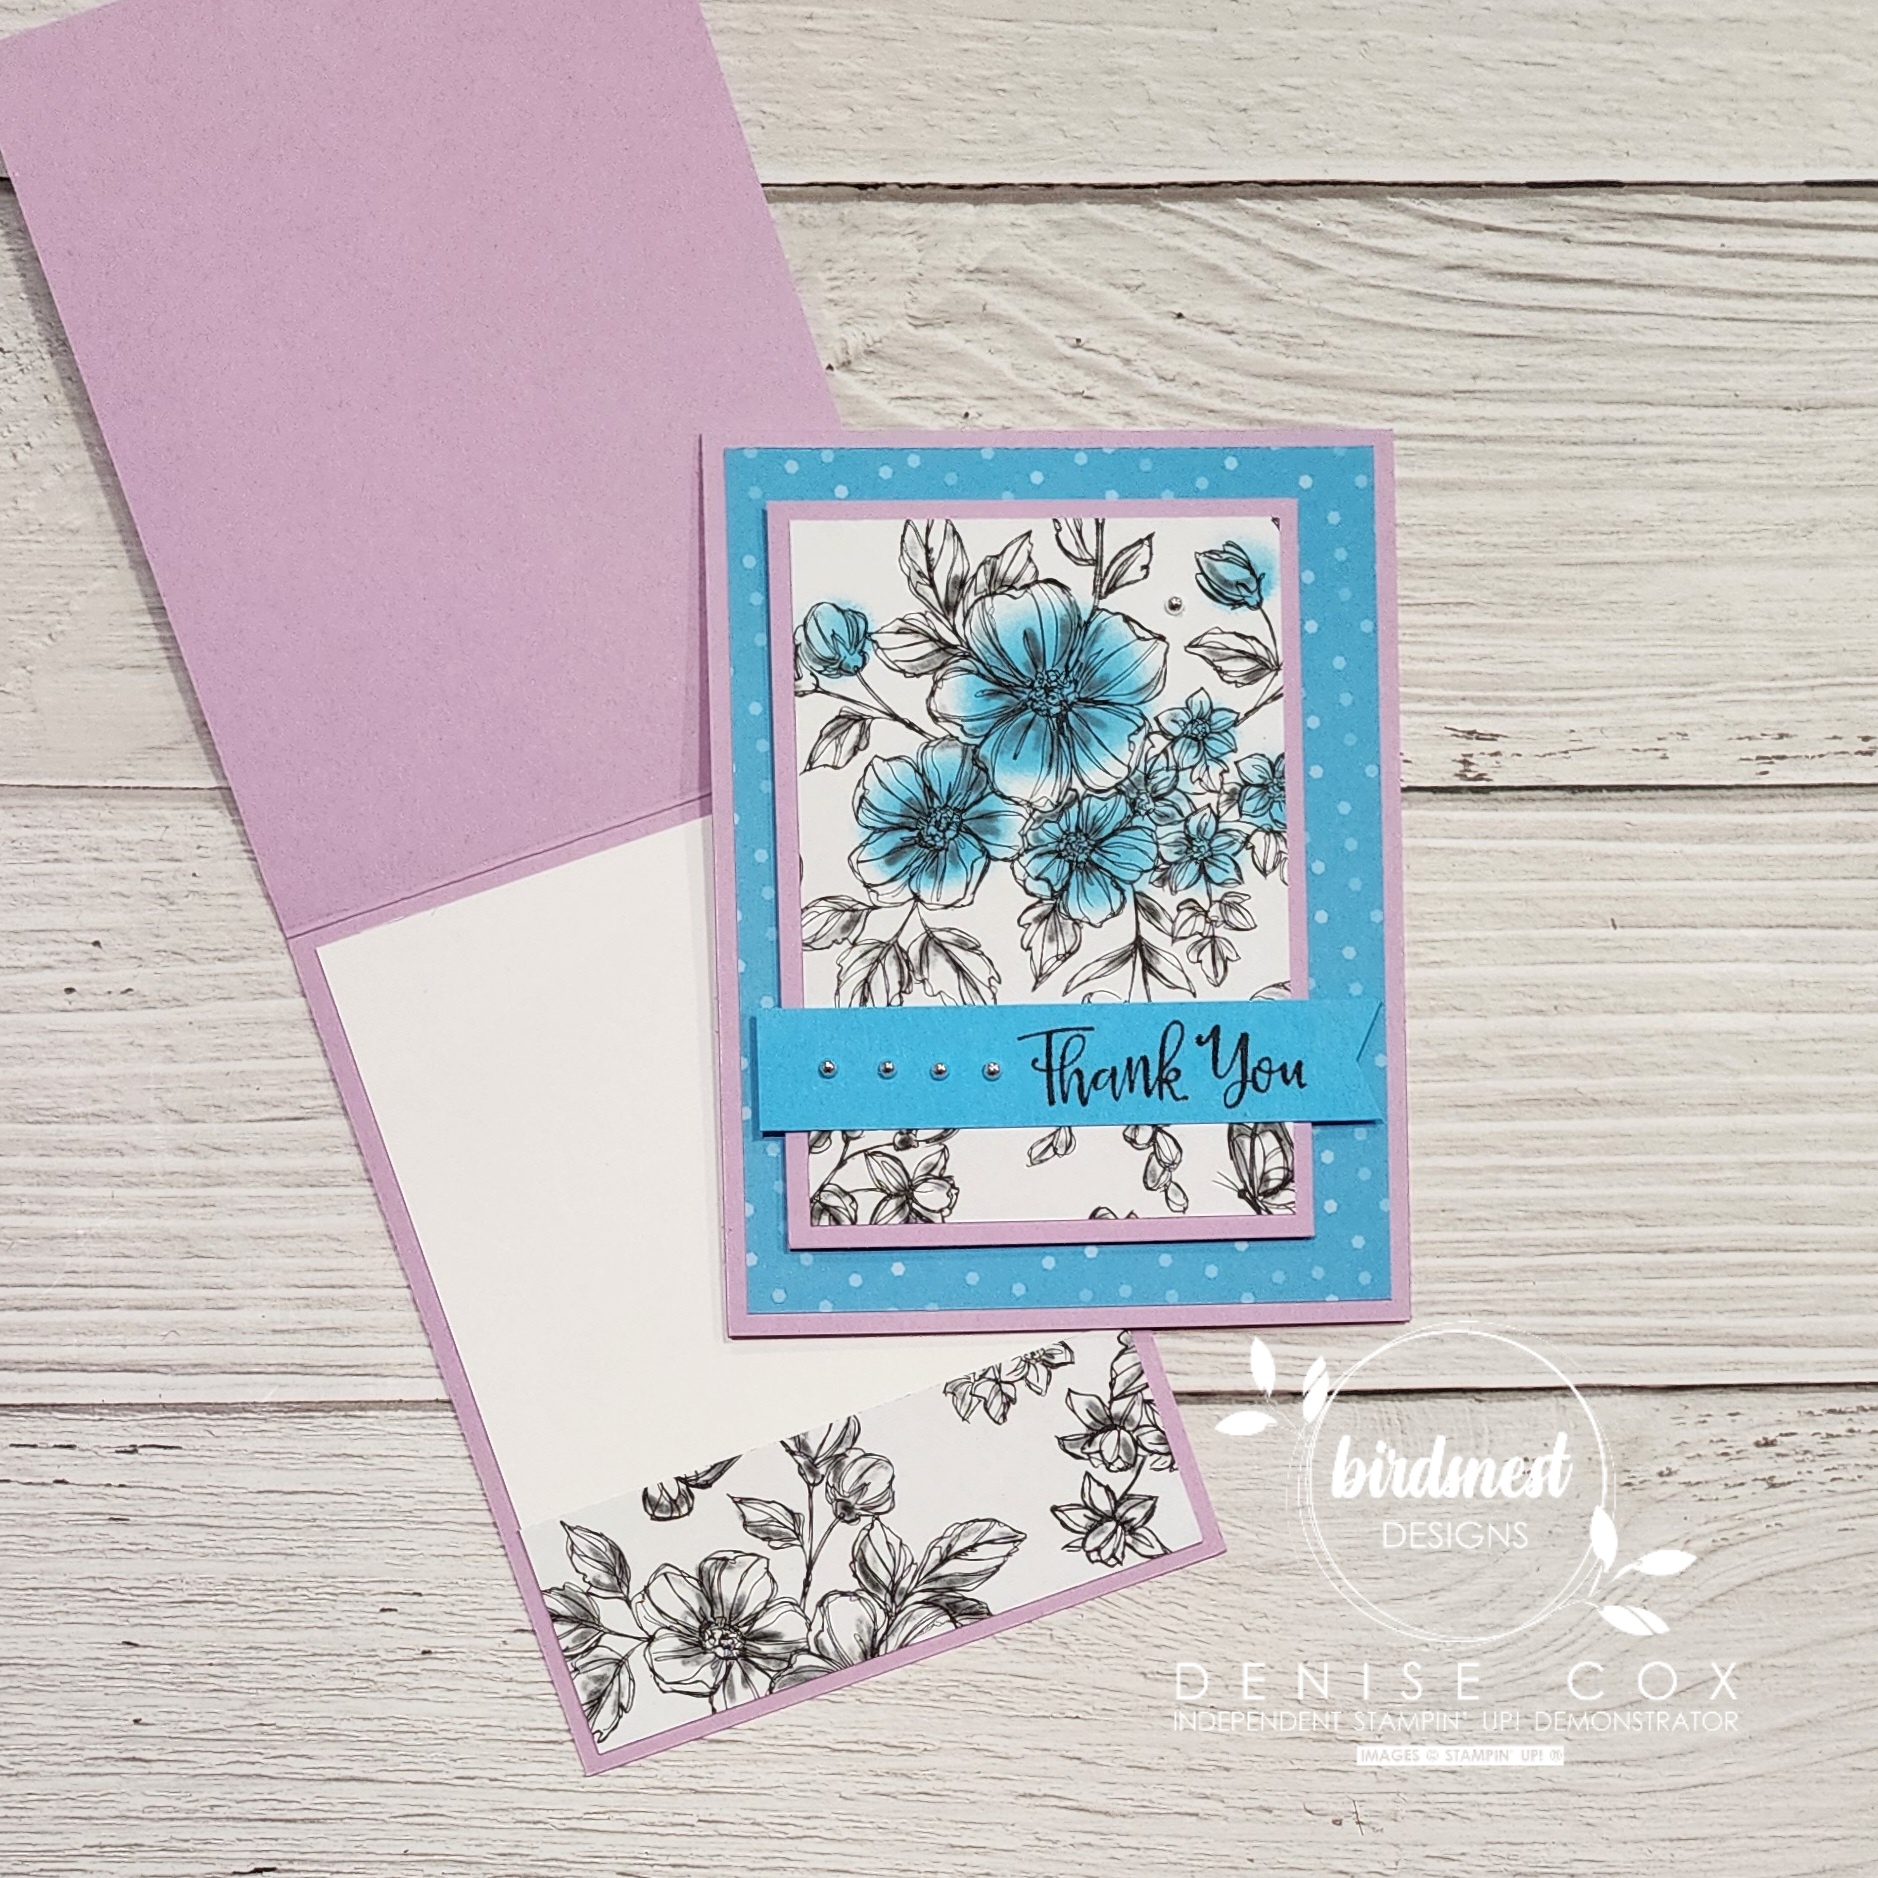 Demonstrator Training Program Customer Thank You card blog hop card made with Stampin' Up! Perfectly Penciled DSP and Peaceful Moments Stamp